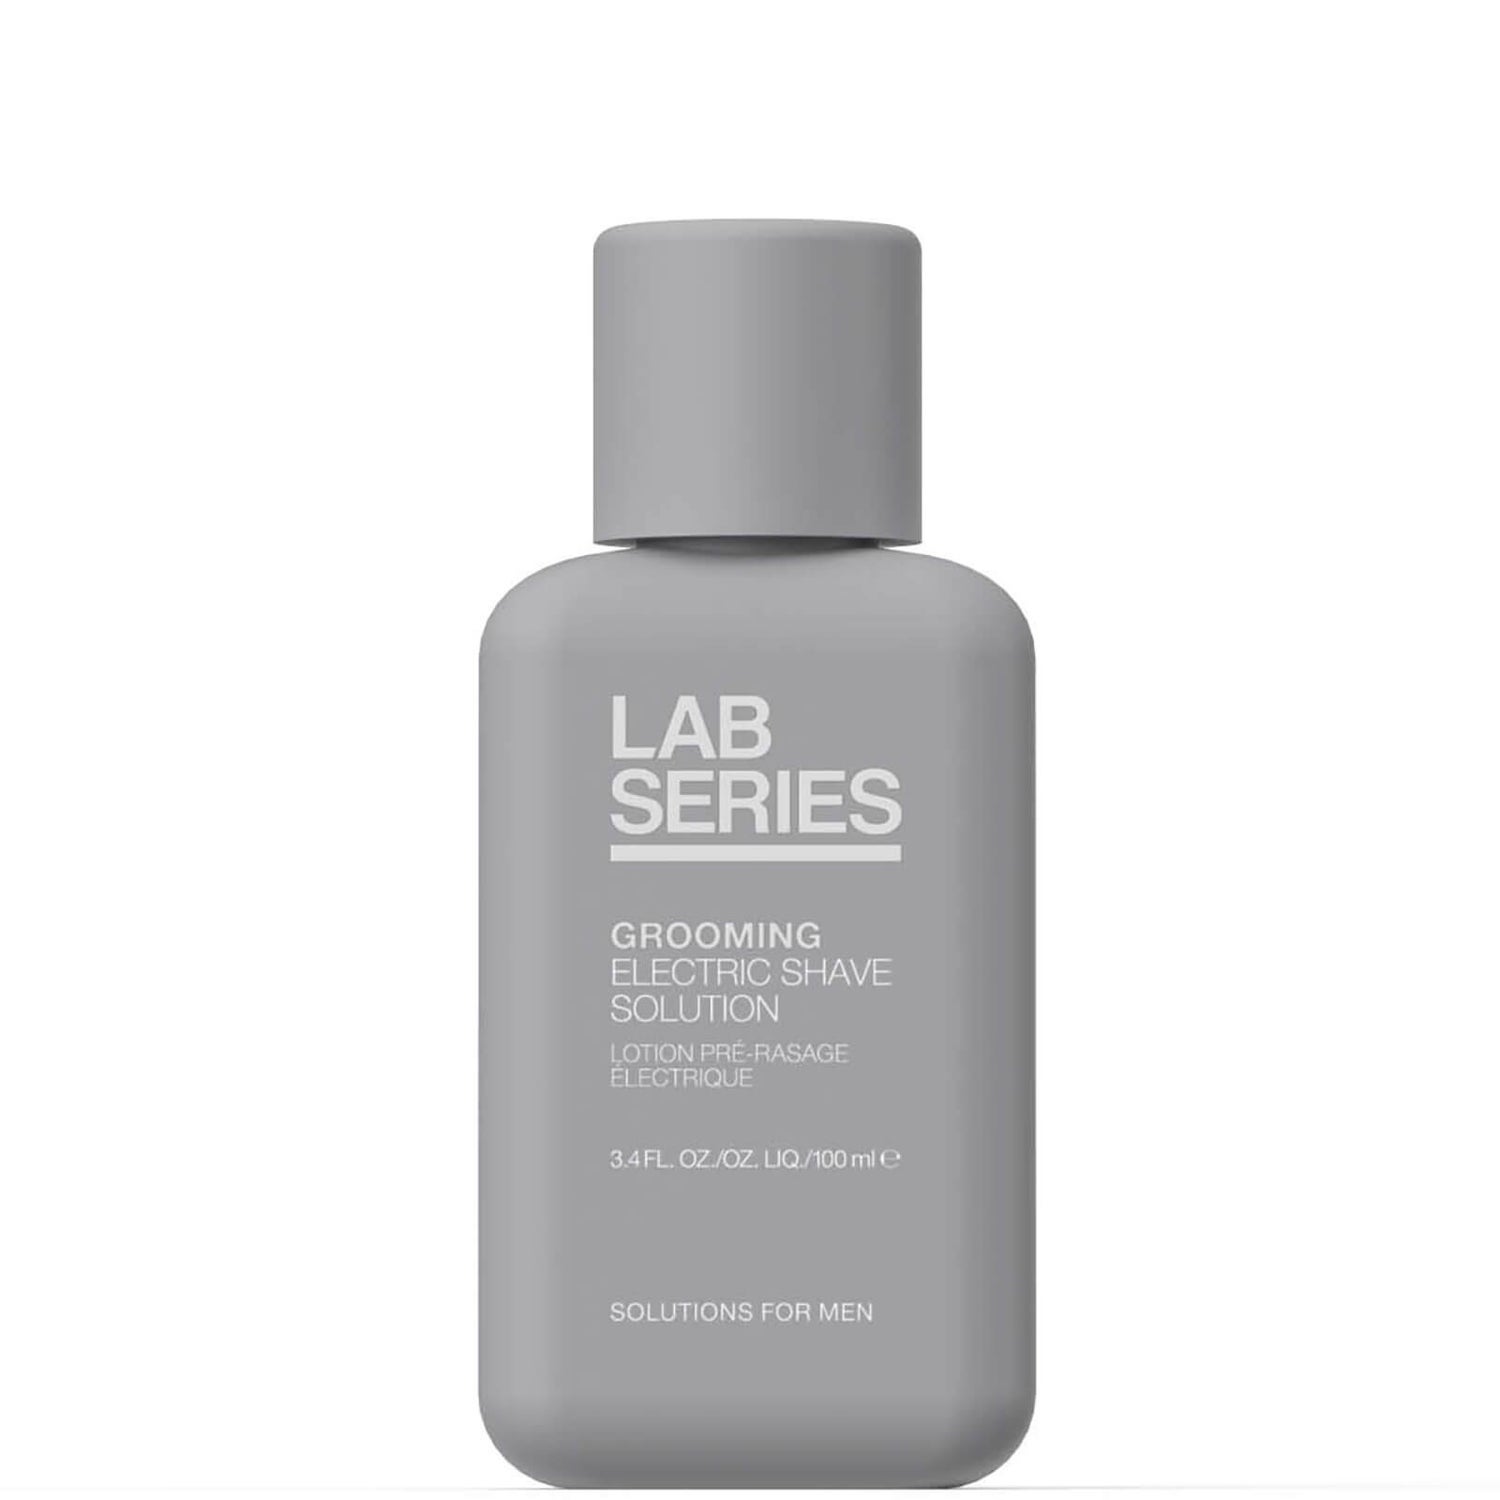 Lab Series Grooming Electric Shave Solution 100ml - LOOKFANTASTIC